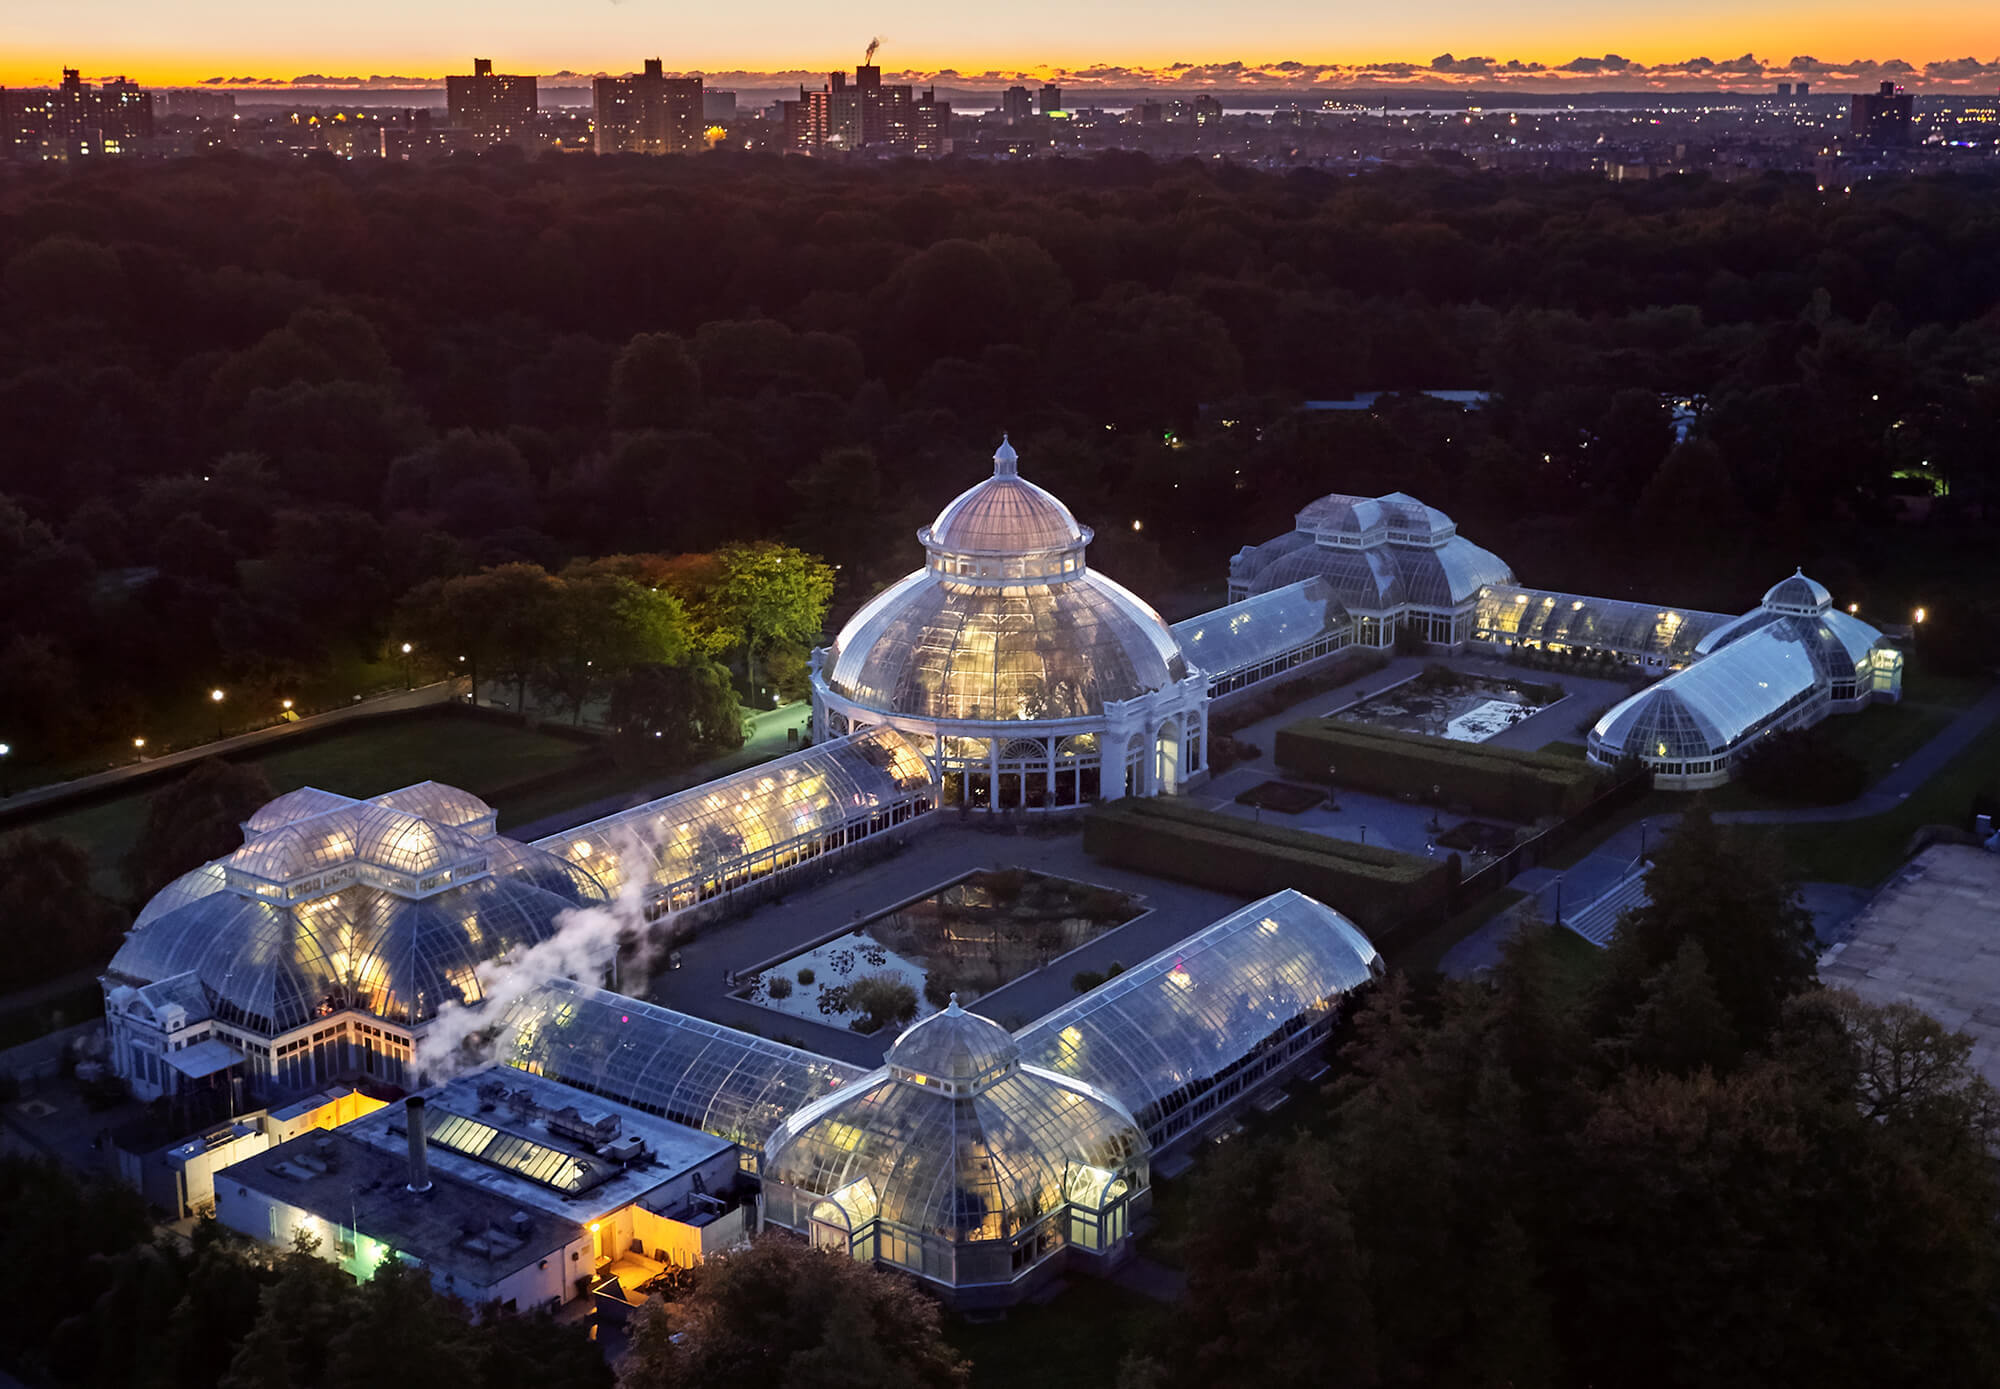 The Enid A. Haupt Conservatory at The New York Botanical Garden seen at sunset from above